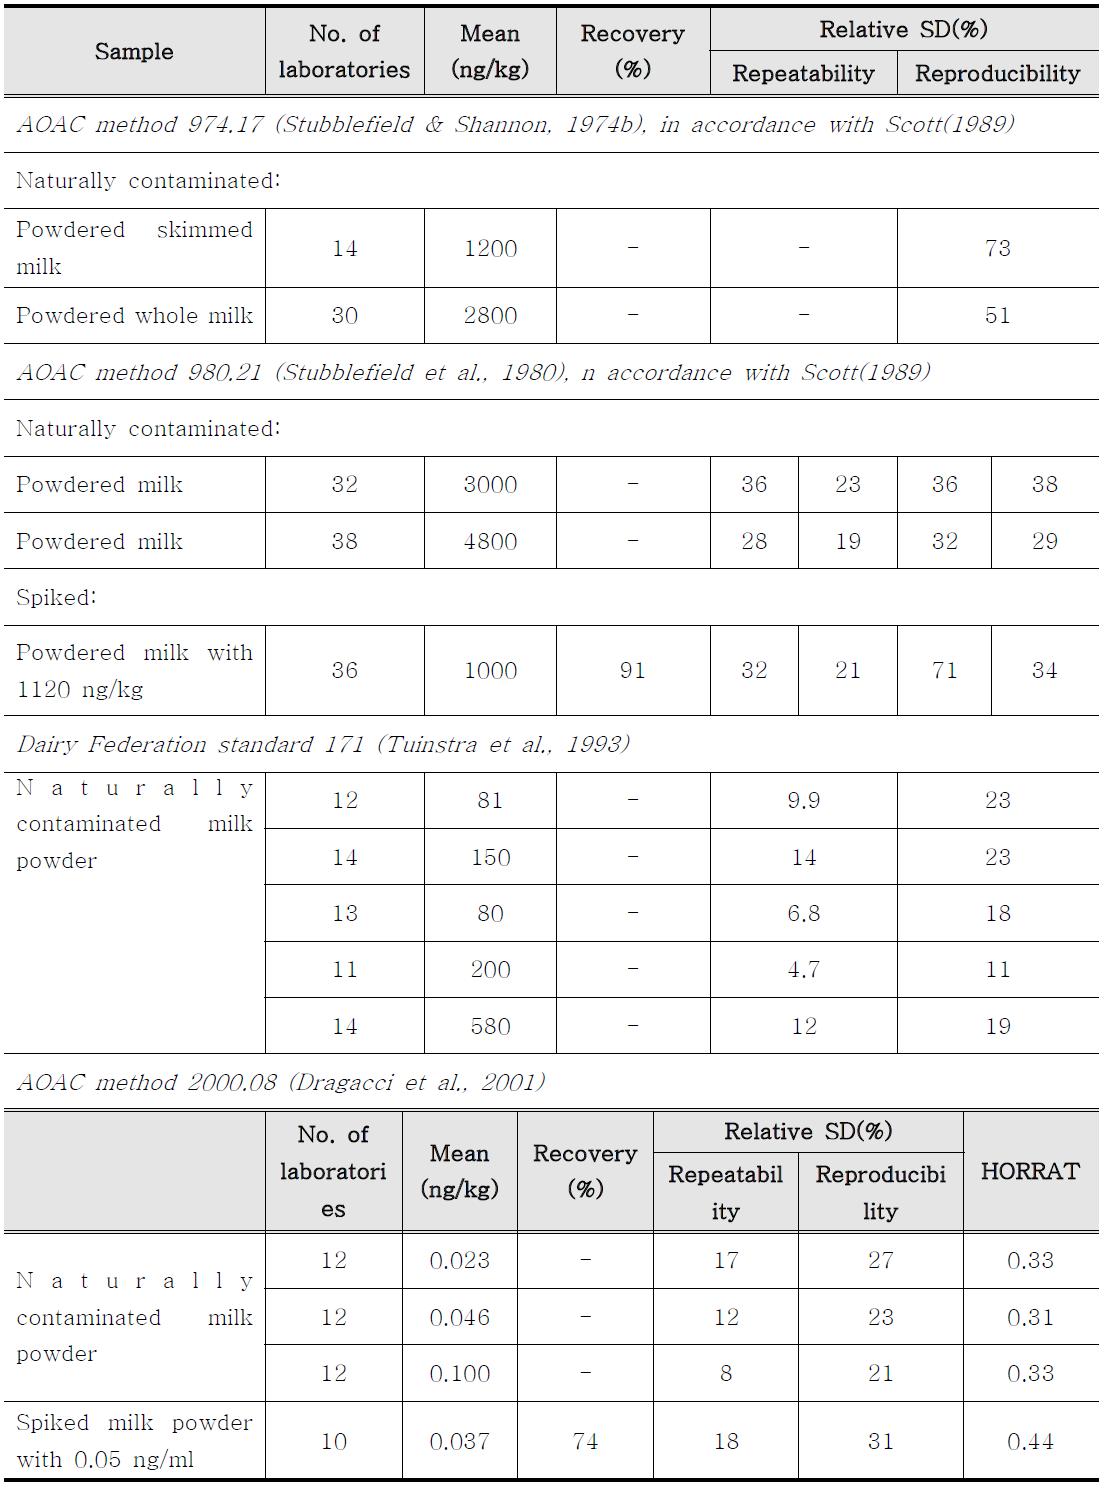 Performance characteristics of methods of analysis for aflatoxin M1 in powdered milk that have been tested in laboratories providing acceptable results in formal collaborative studies by international organizations (JECFA 47, 2001)